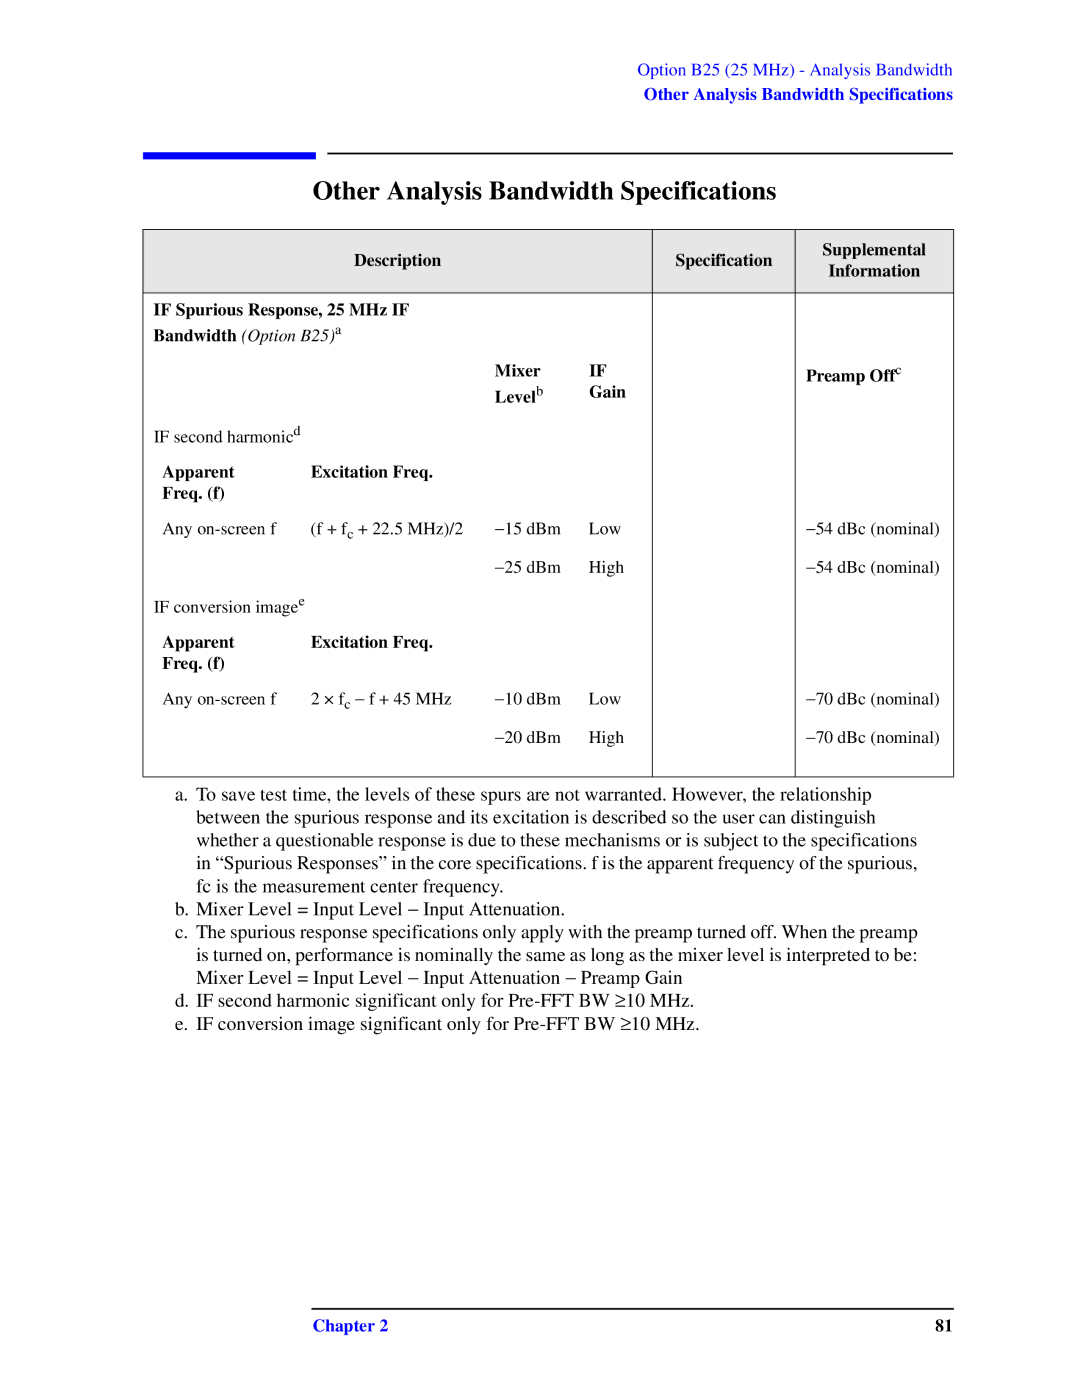 Agilent Technologies N9010A specifications Other Analysis Bandwidth Specifications, Apparent Excitation Freq Freq. f 